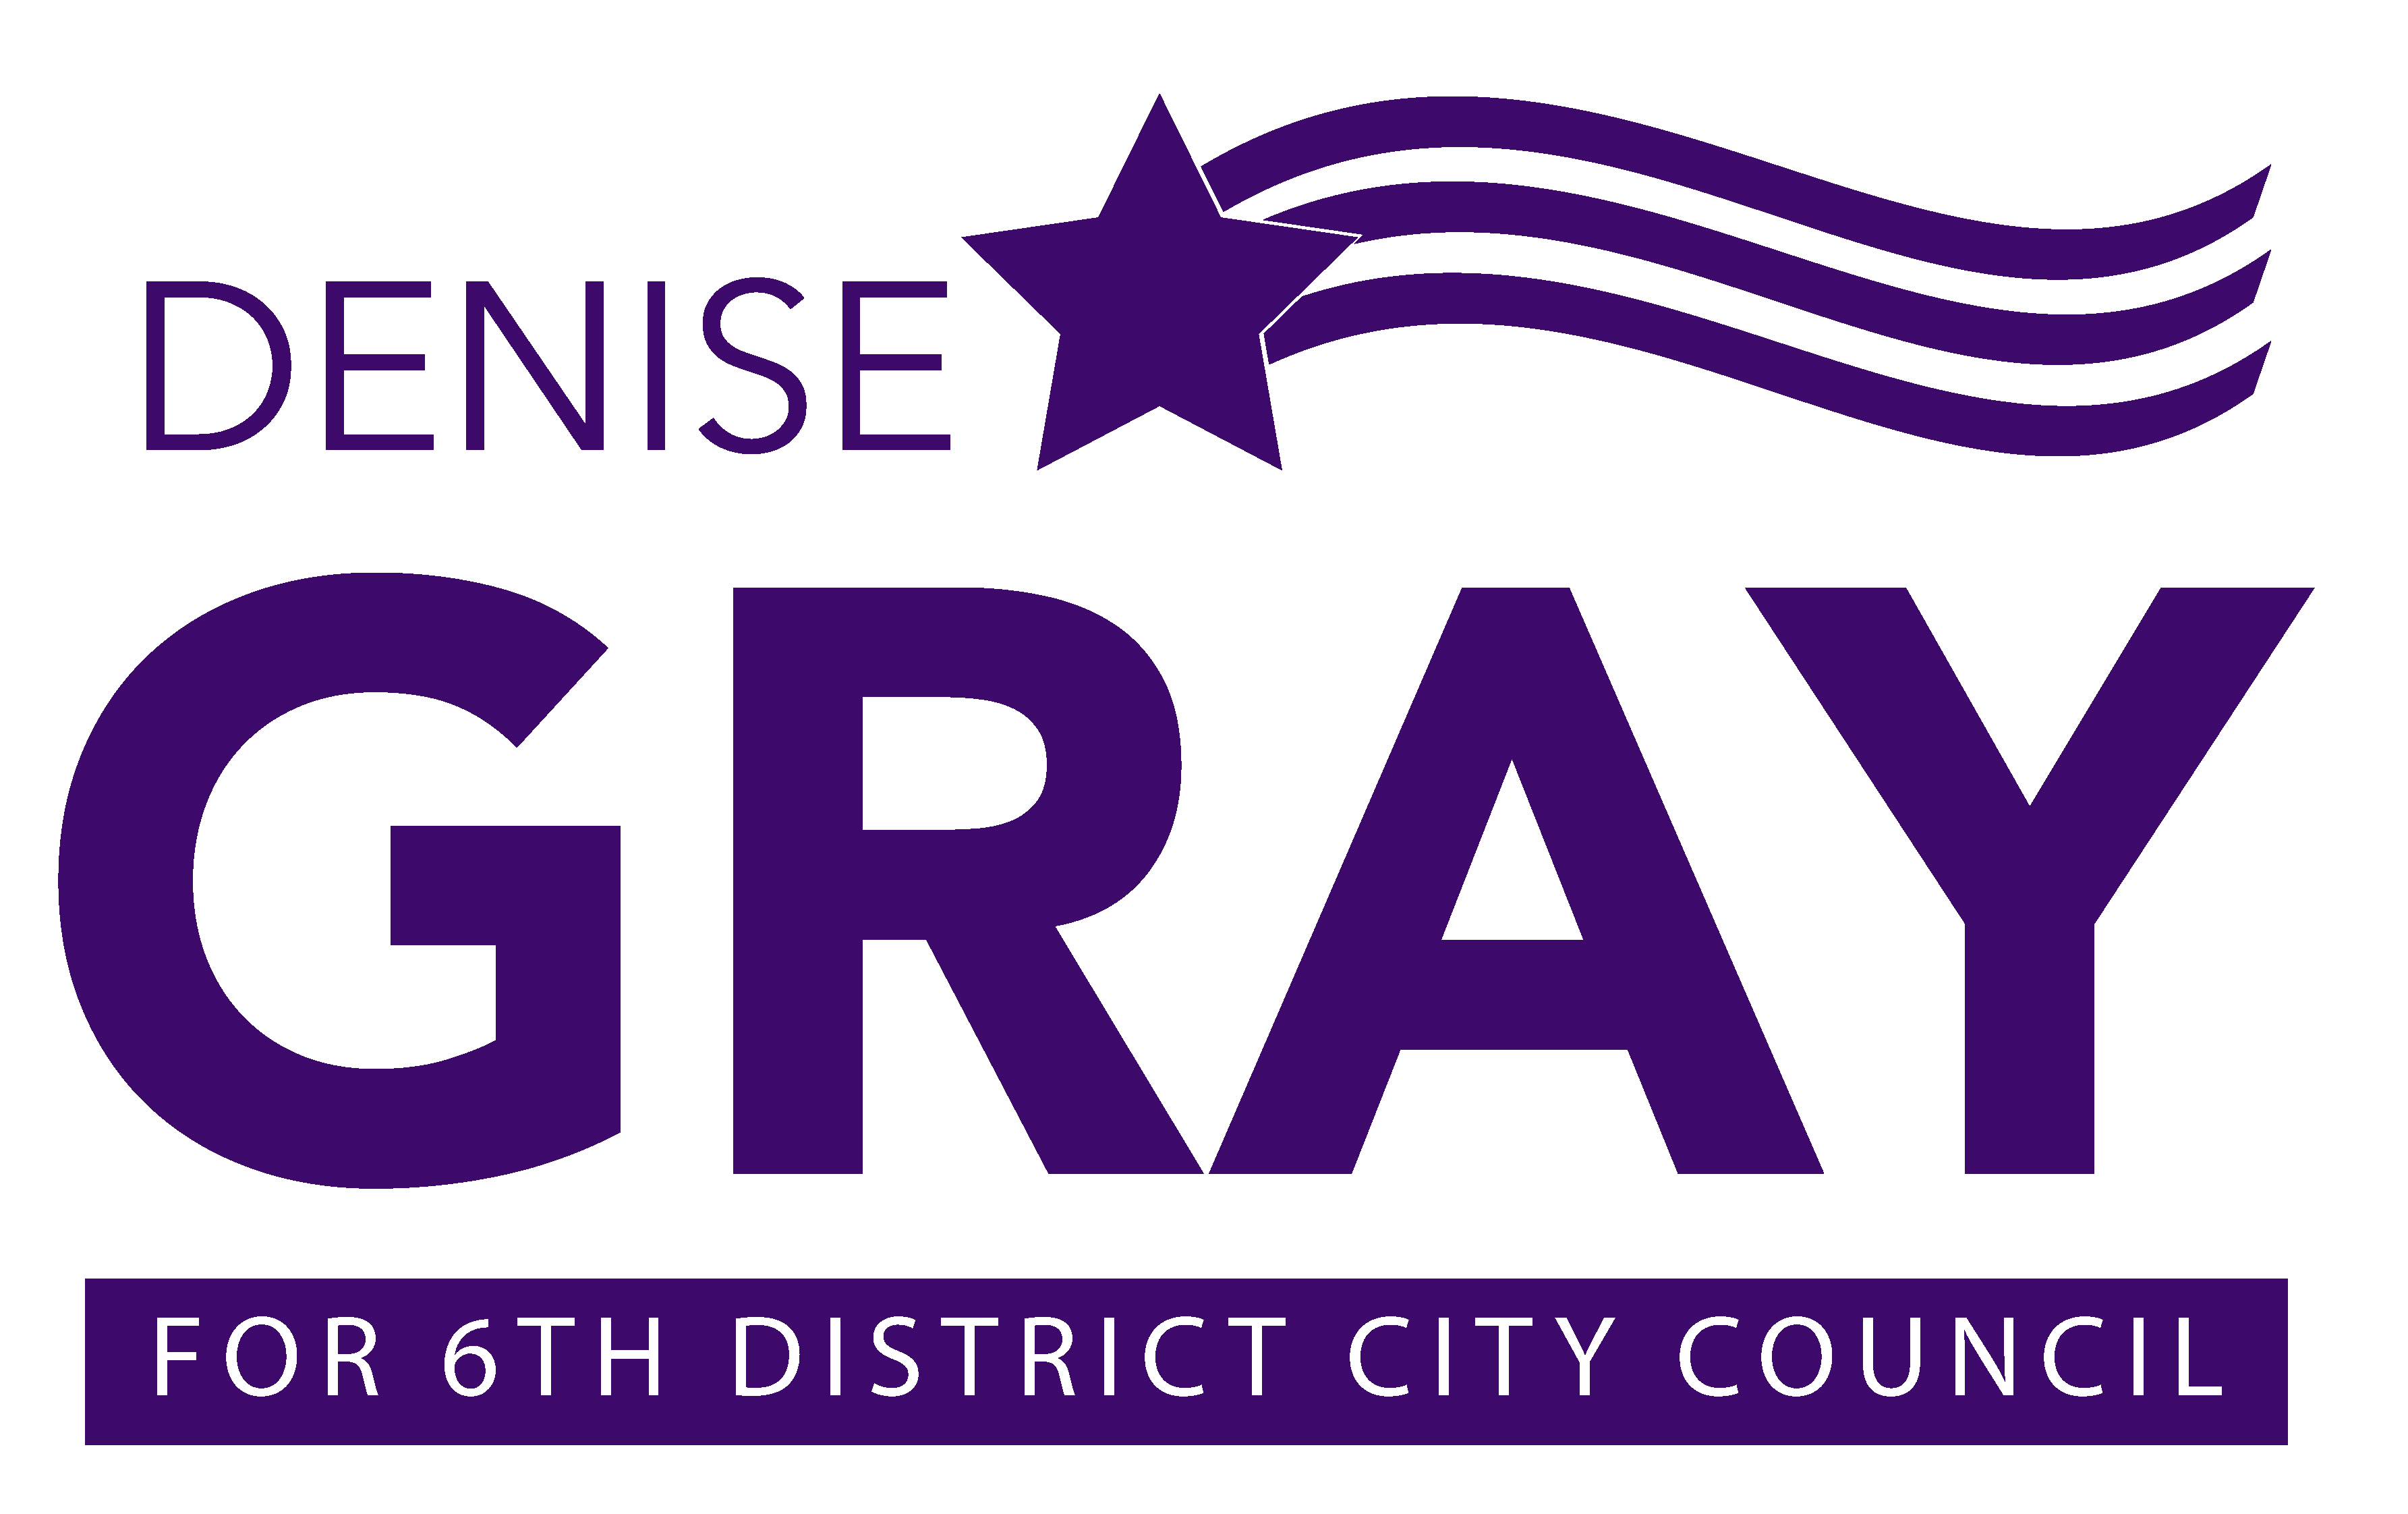 Denise Gray for 6th District City Council